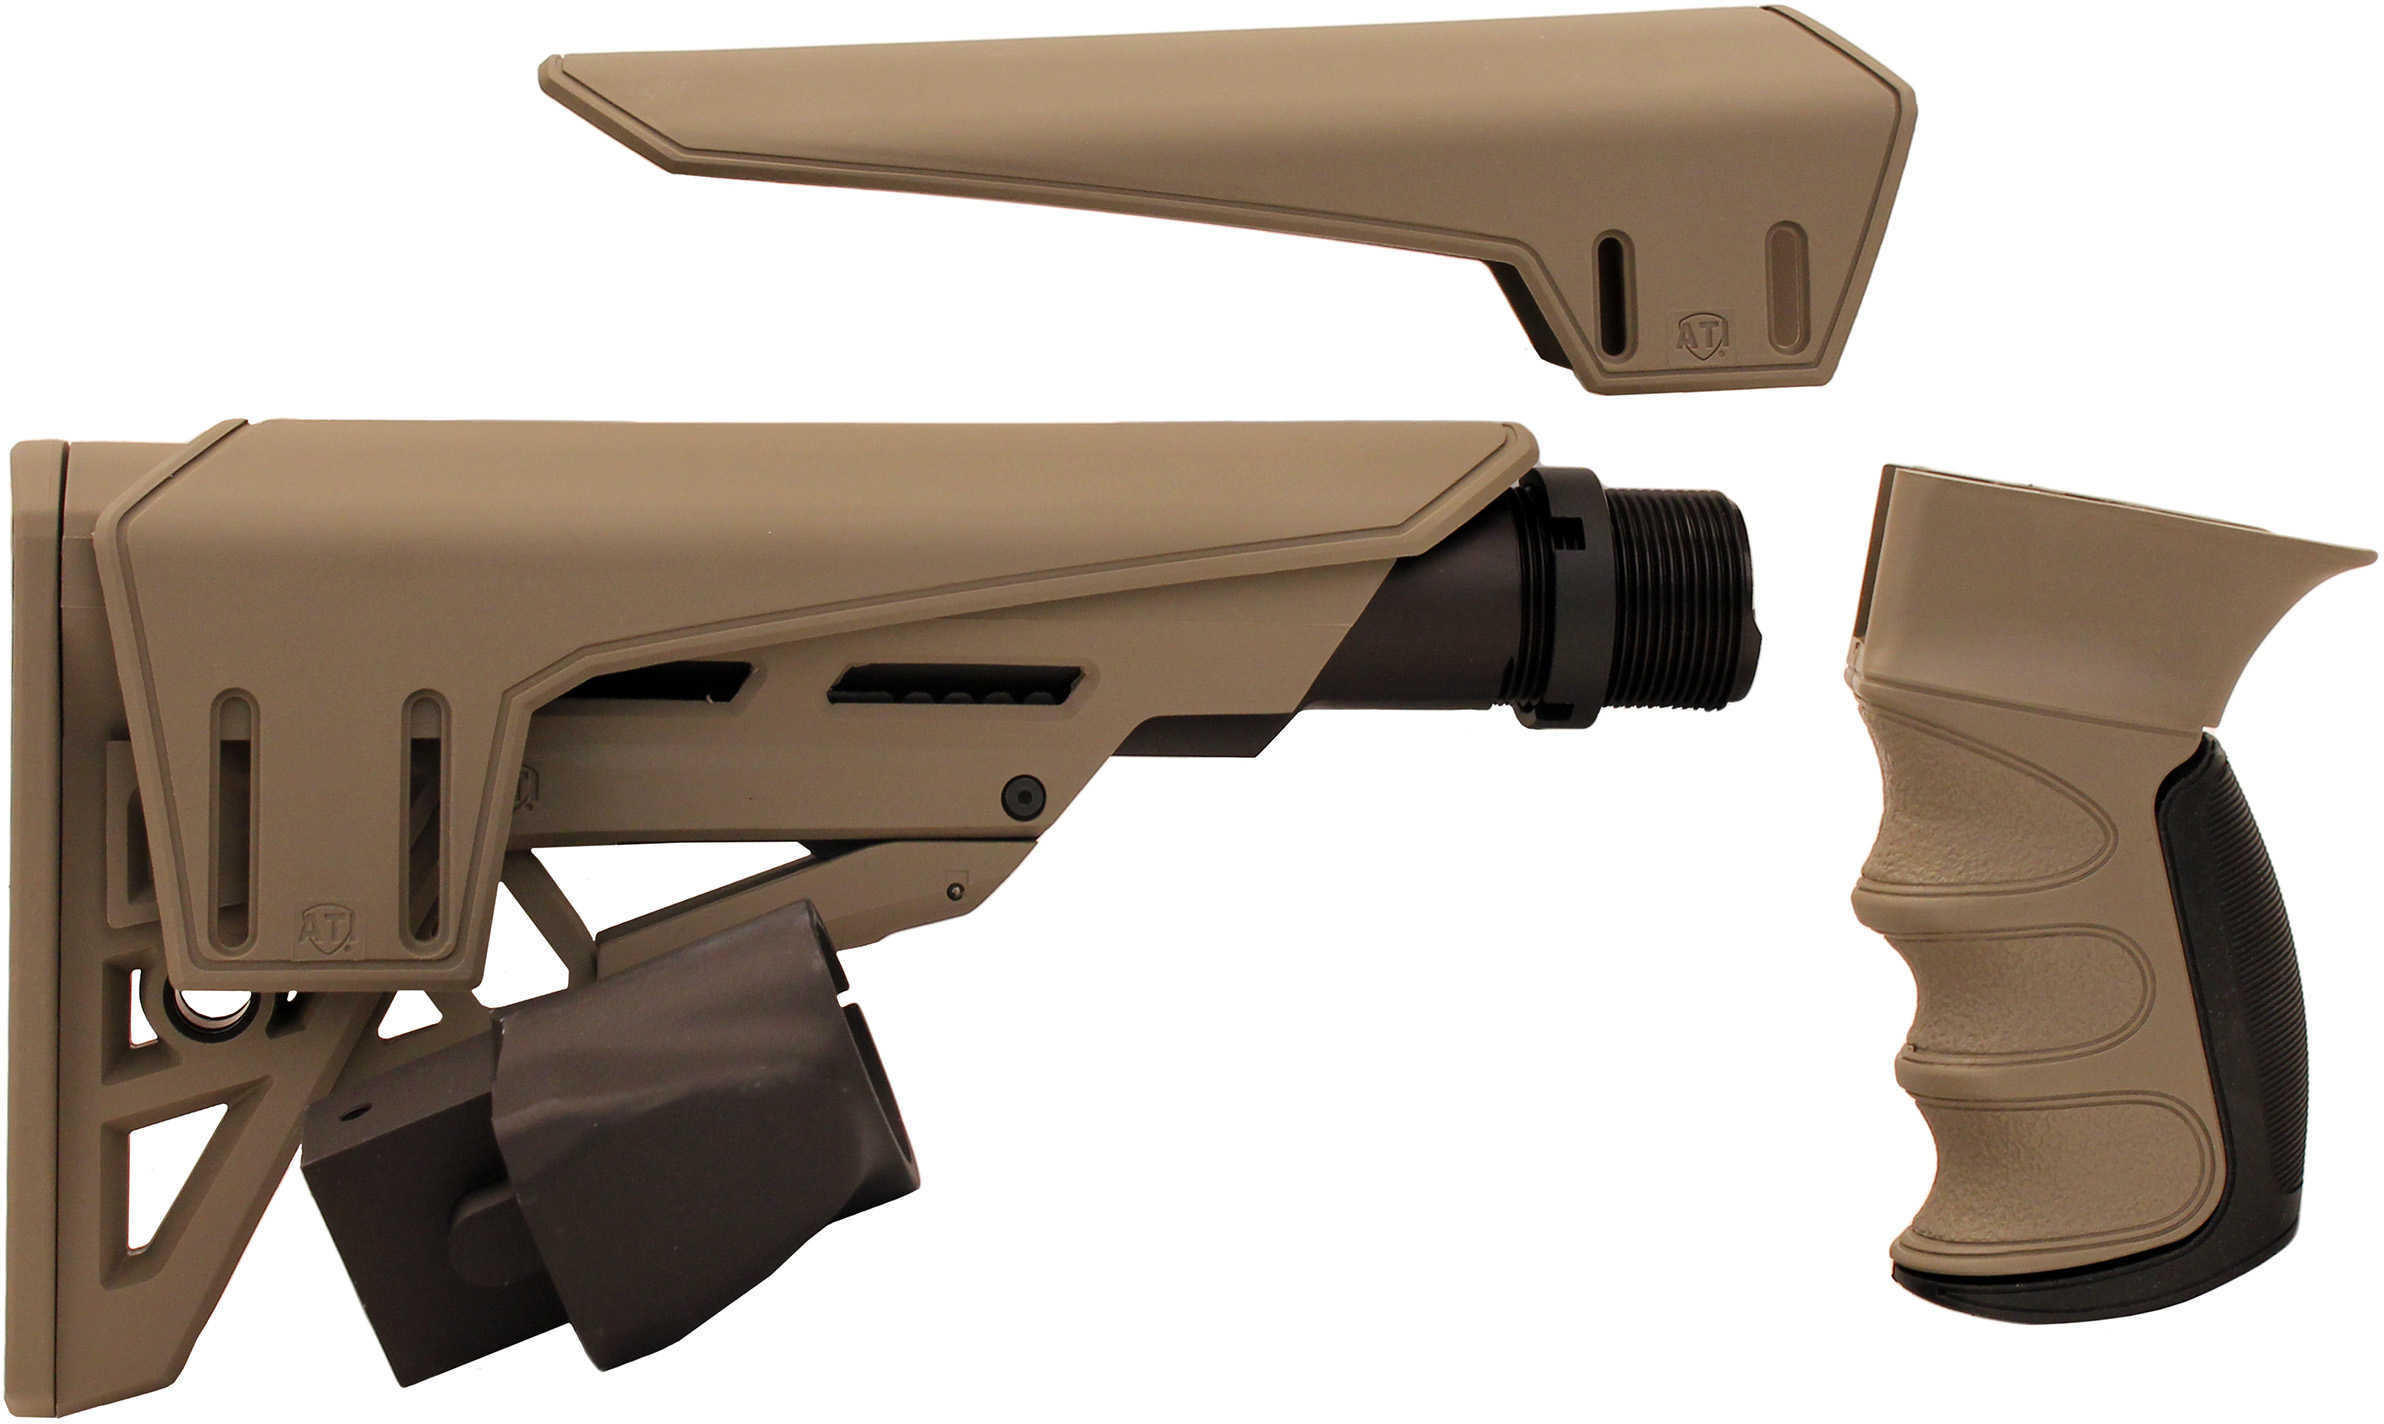 Advanced Technology Intl. Saiga TactLite Elite Six Position Adjustable Stock and Scorpion Recoil Syst